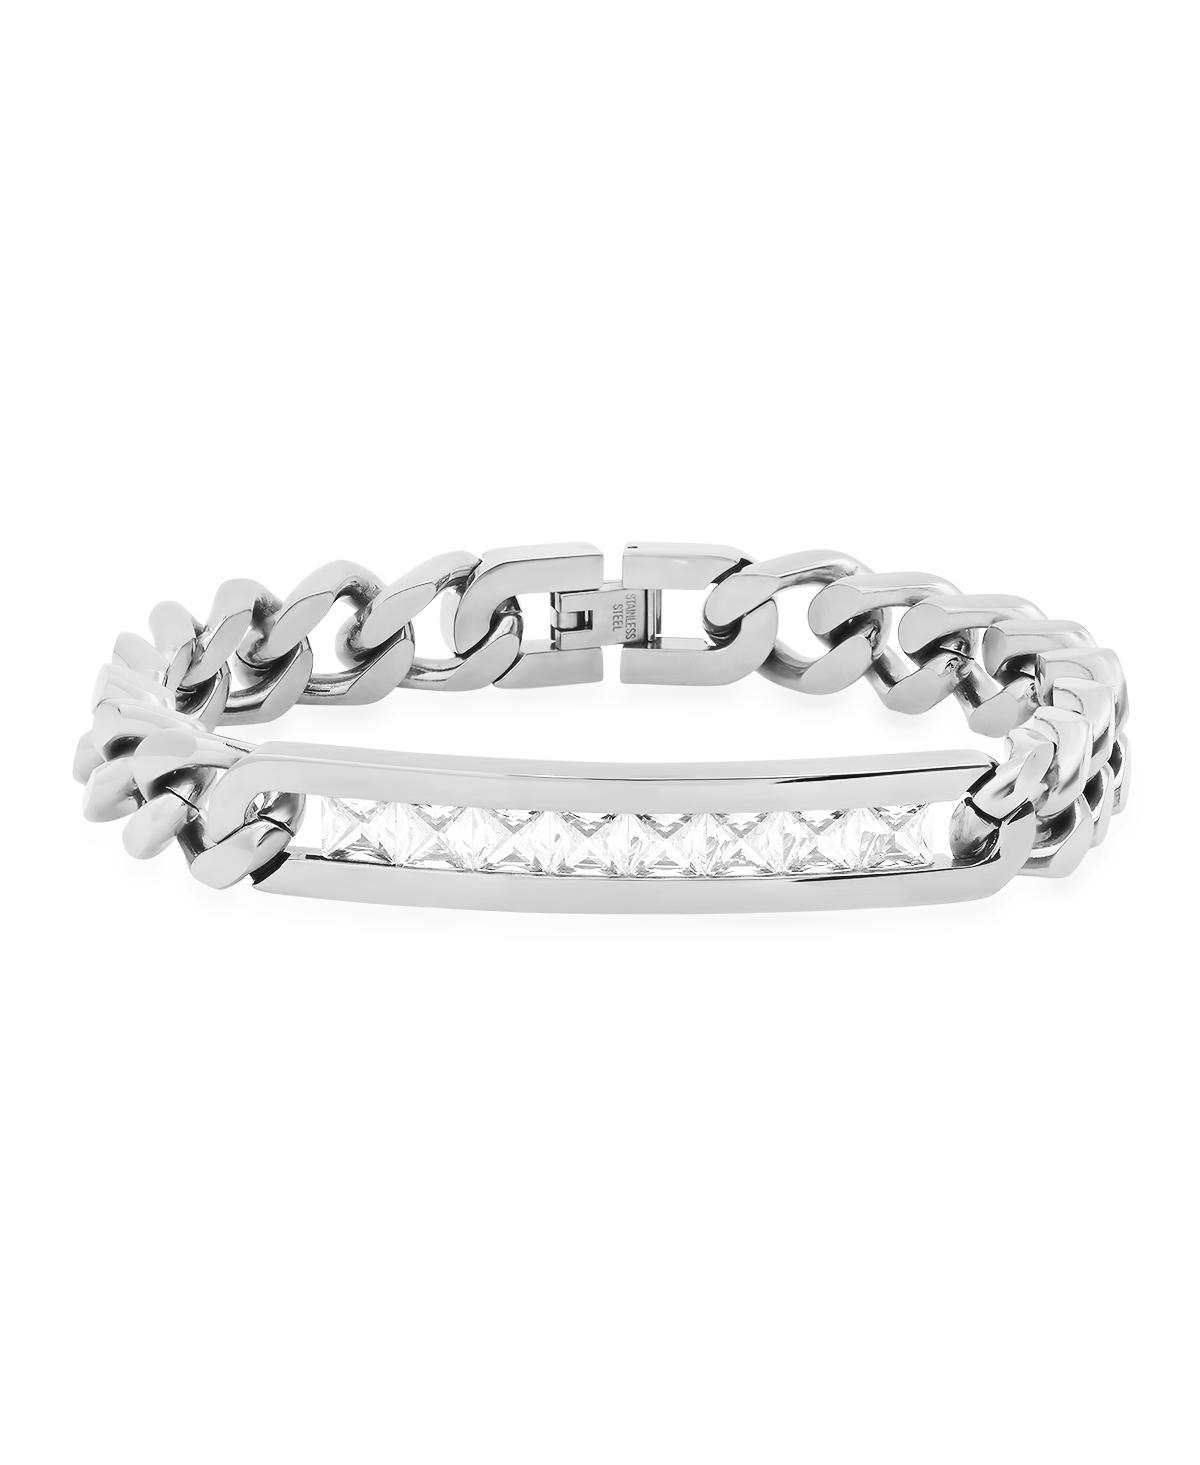 Thick Cuban Link Chain and Simulated White Diamonds Id Bracelet - Metallic